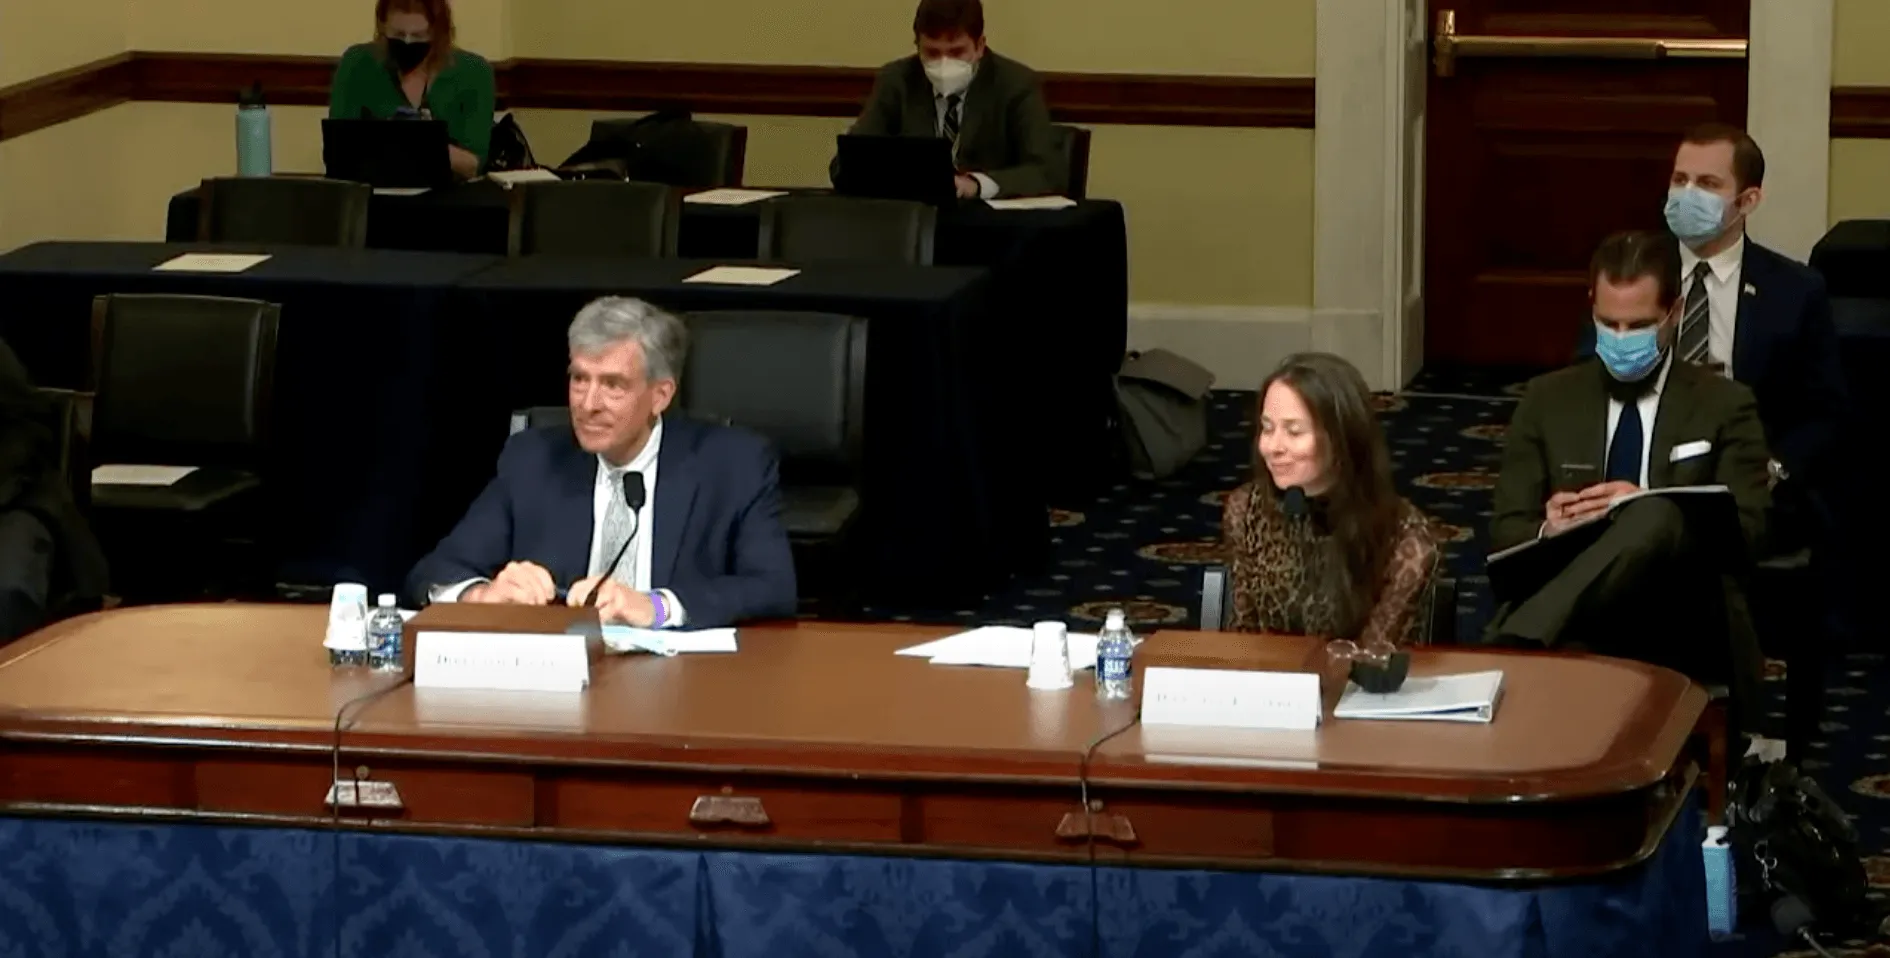 CISA Director Jen Easterly and National Cybersecurity Director Chris Inglis testify before the House Committee on Homeland Security on November 3rd, 2021.